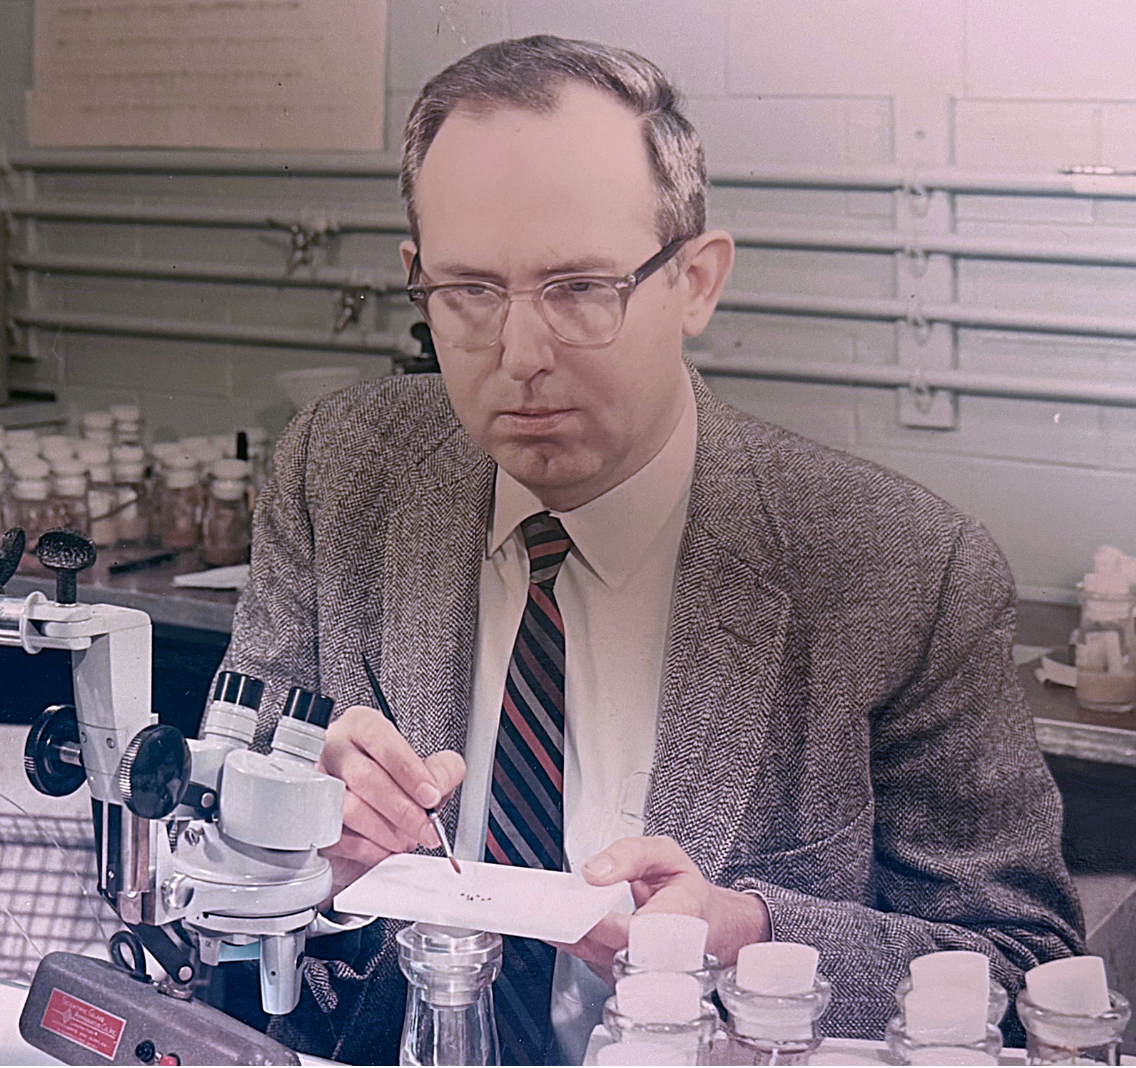 Ed Grell at his dissecting microscope using ether to anesthetize his flies.